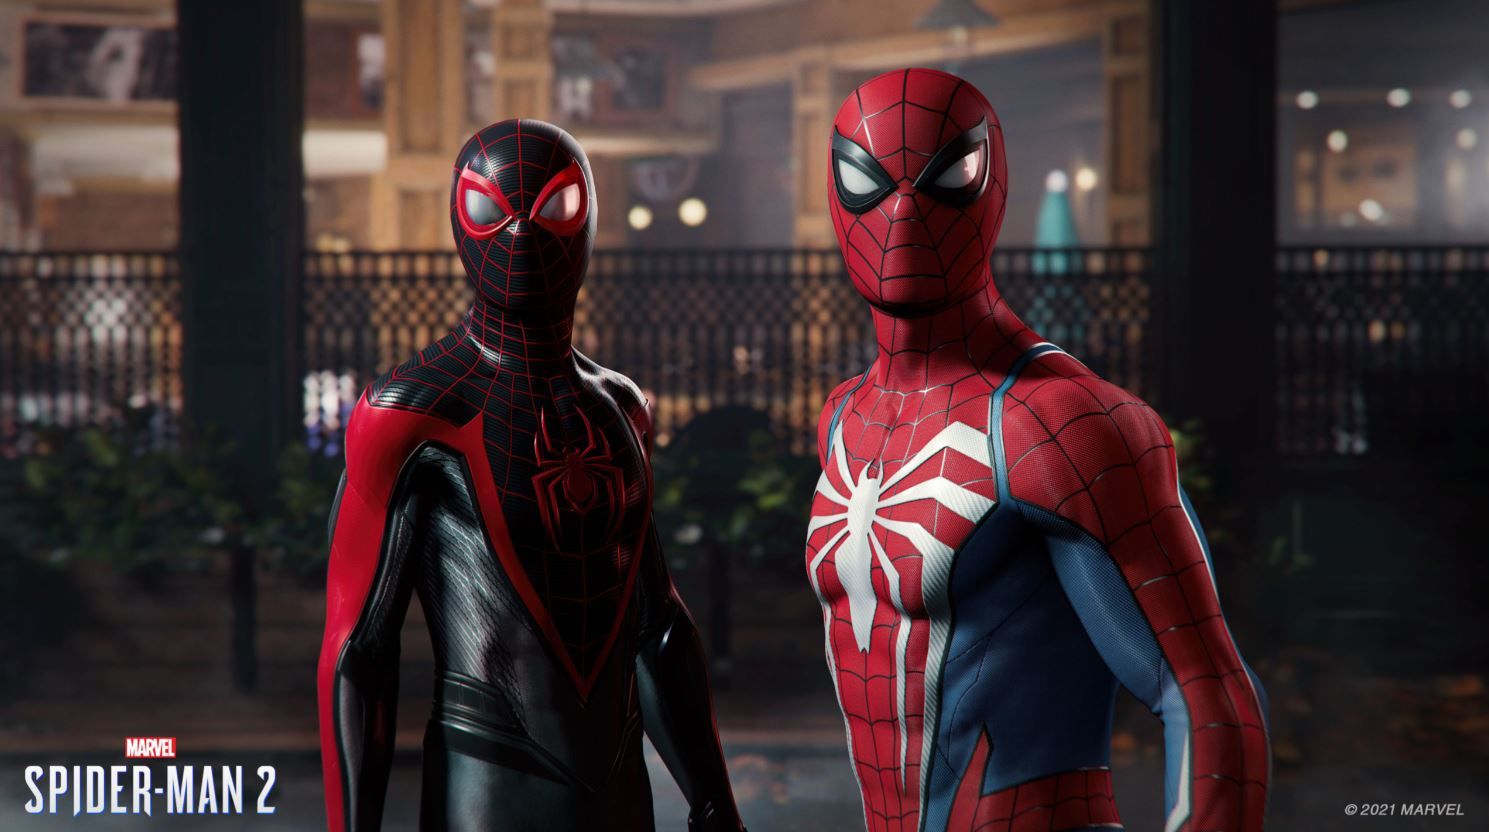 Peter Parker and Miles Morales in their Spidey suits in Marvel's Spider-Man 2 trailer